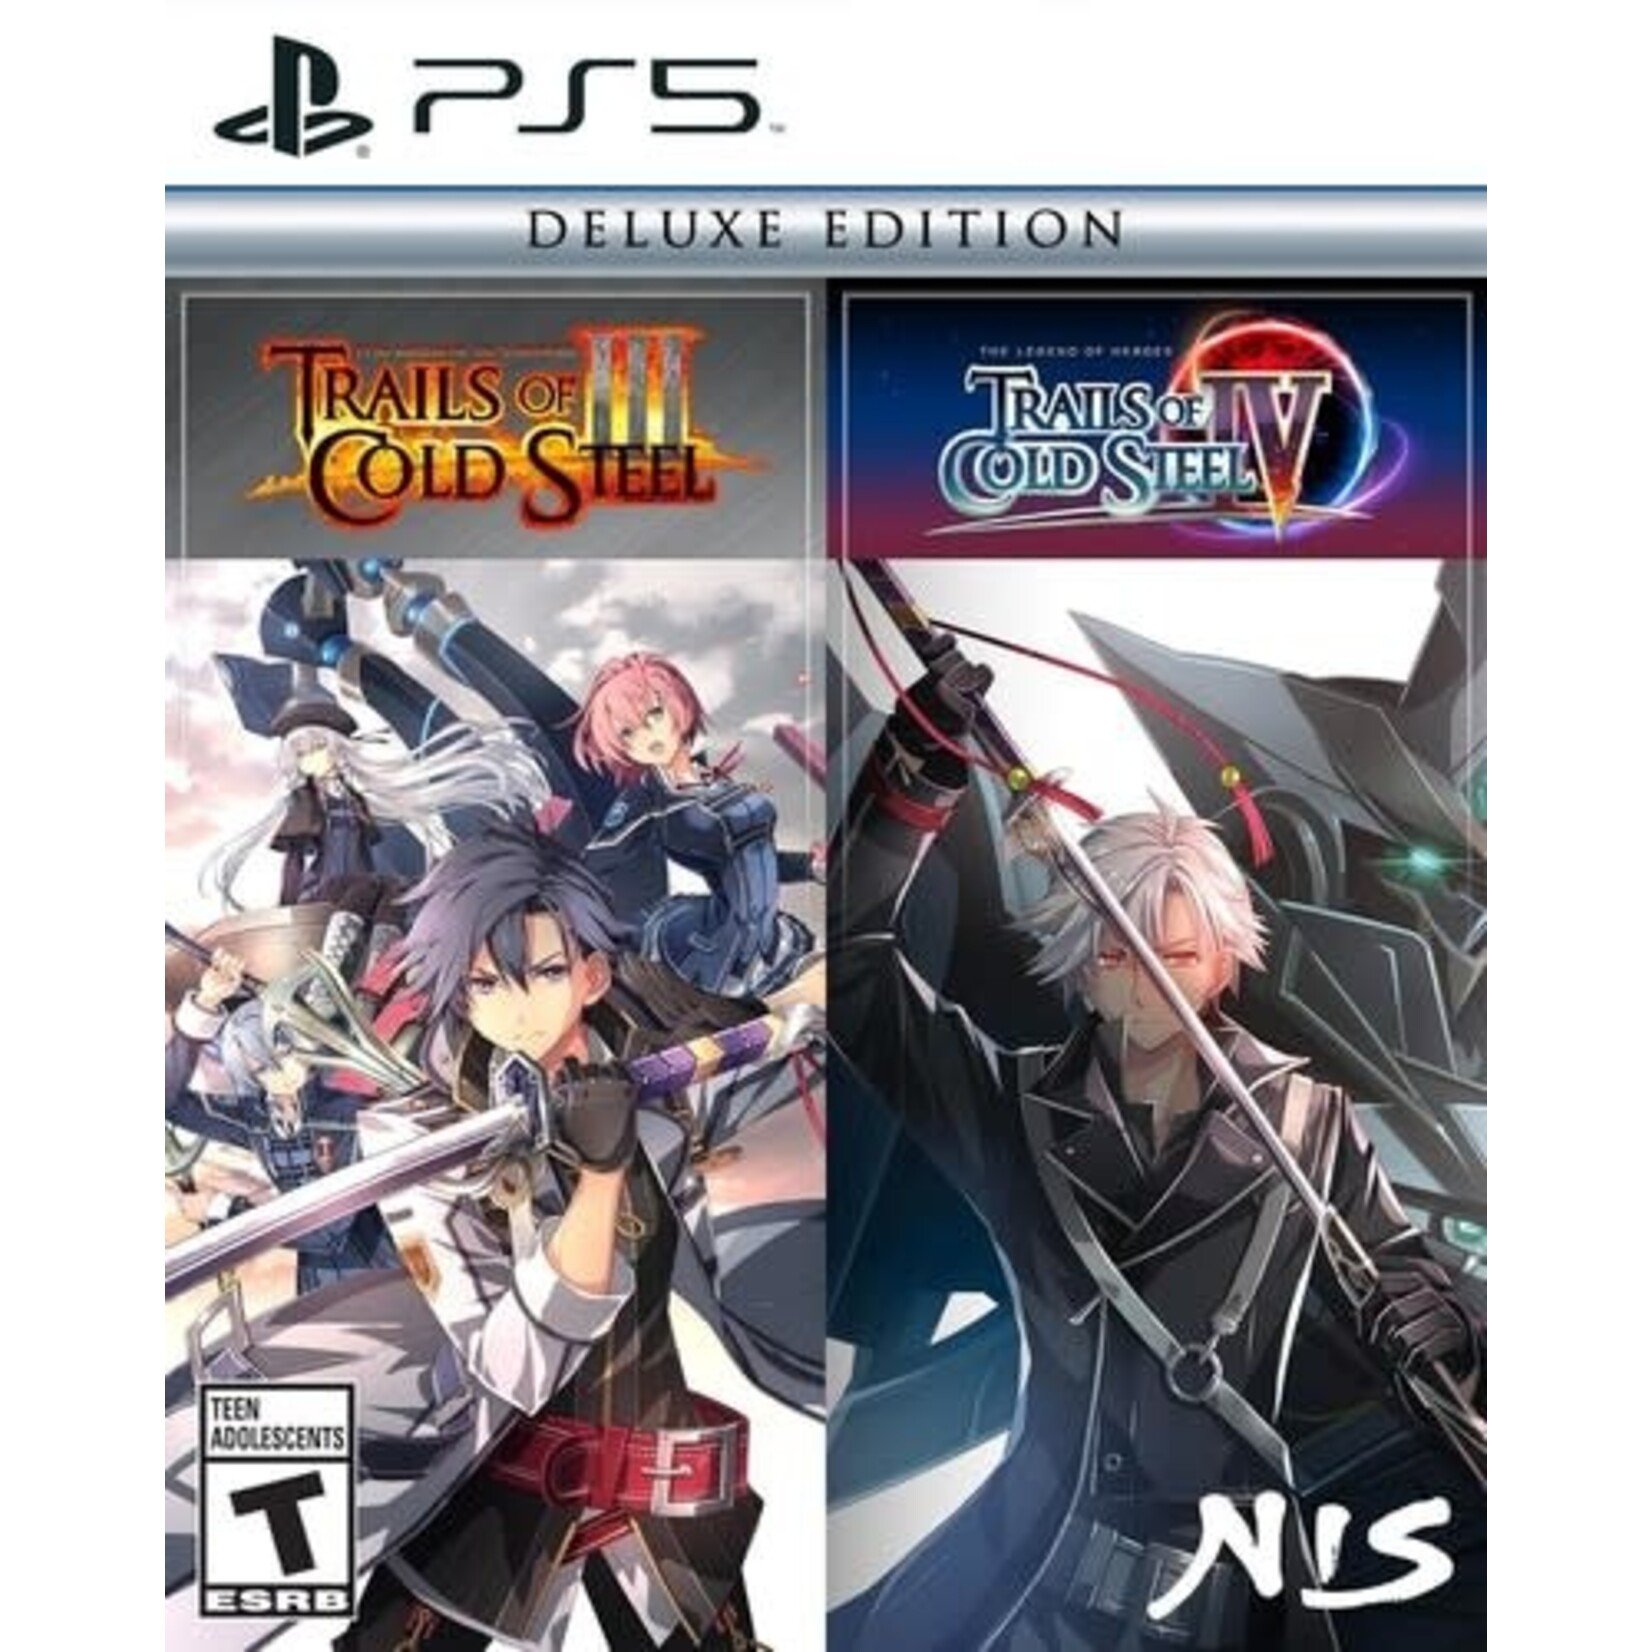 PS5-The Legend of Heroes: Trails of Cold Steel III / The Legend of Heroes: Trails of Cold Steel IV - Deluxe Edition